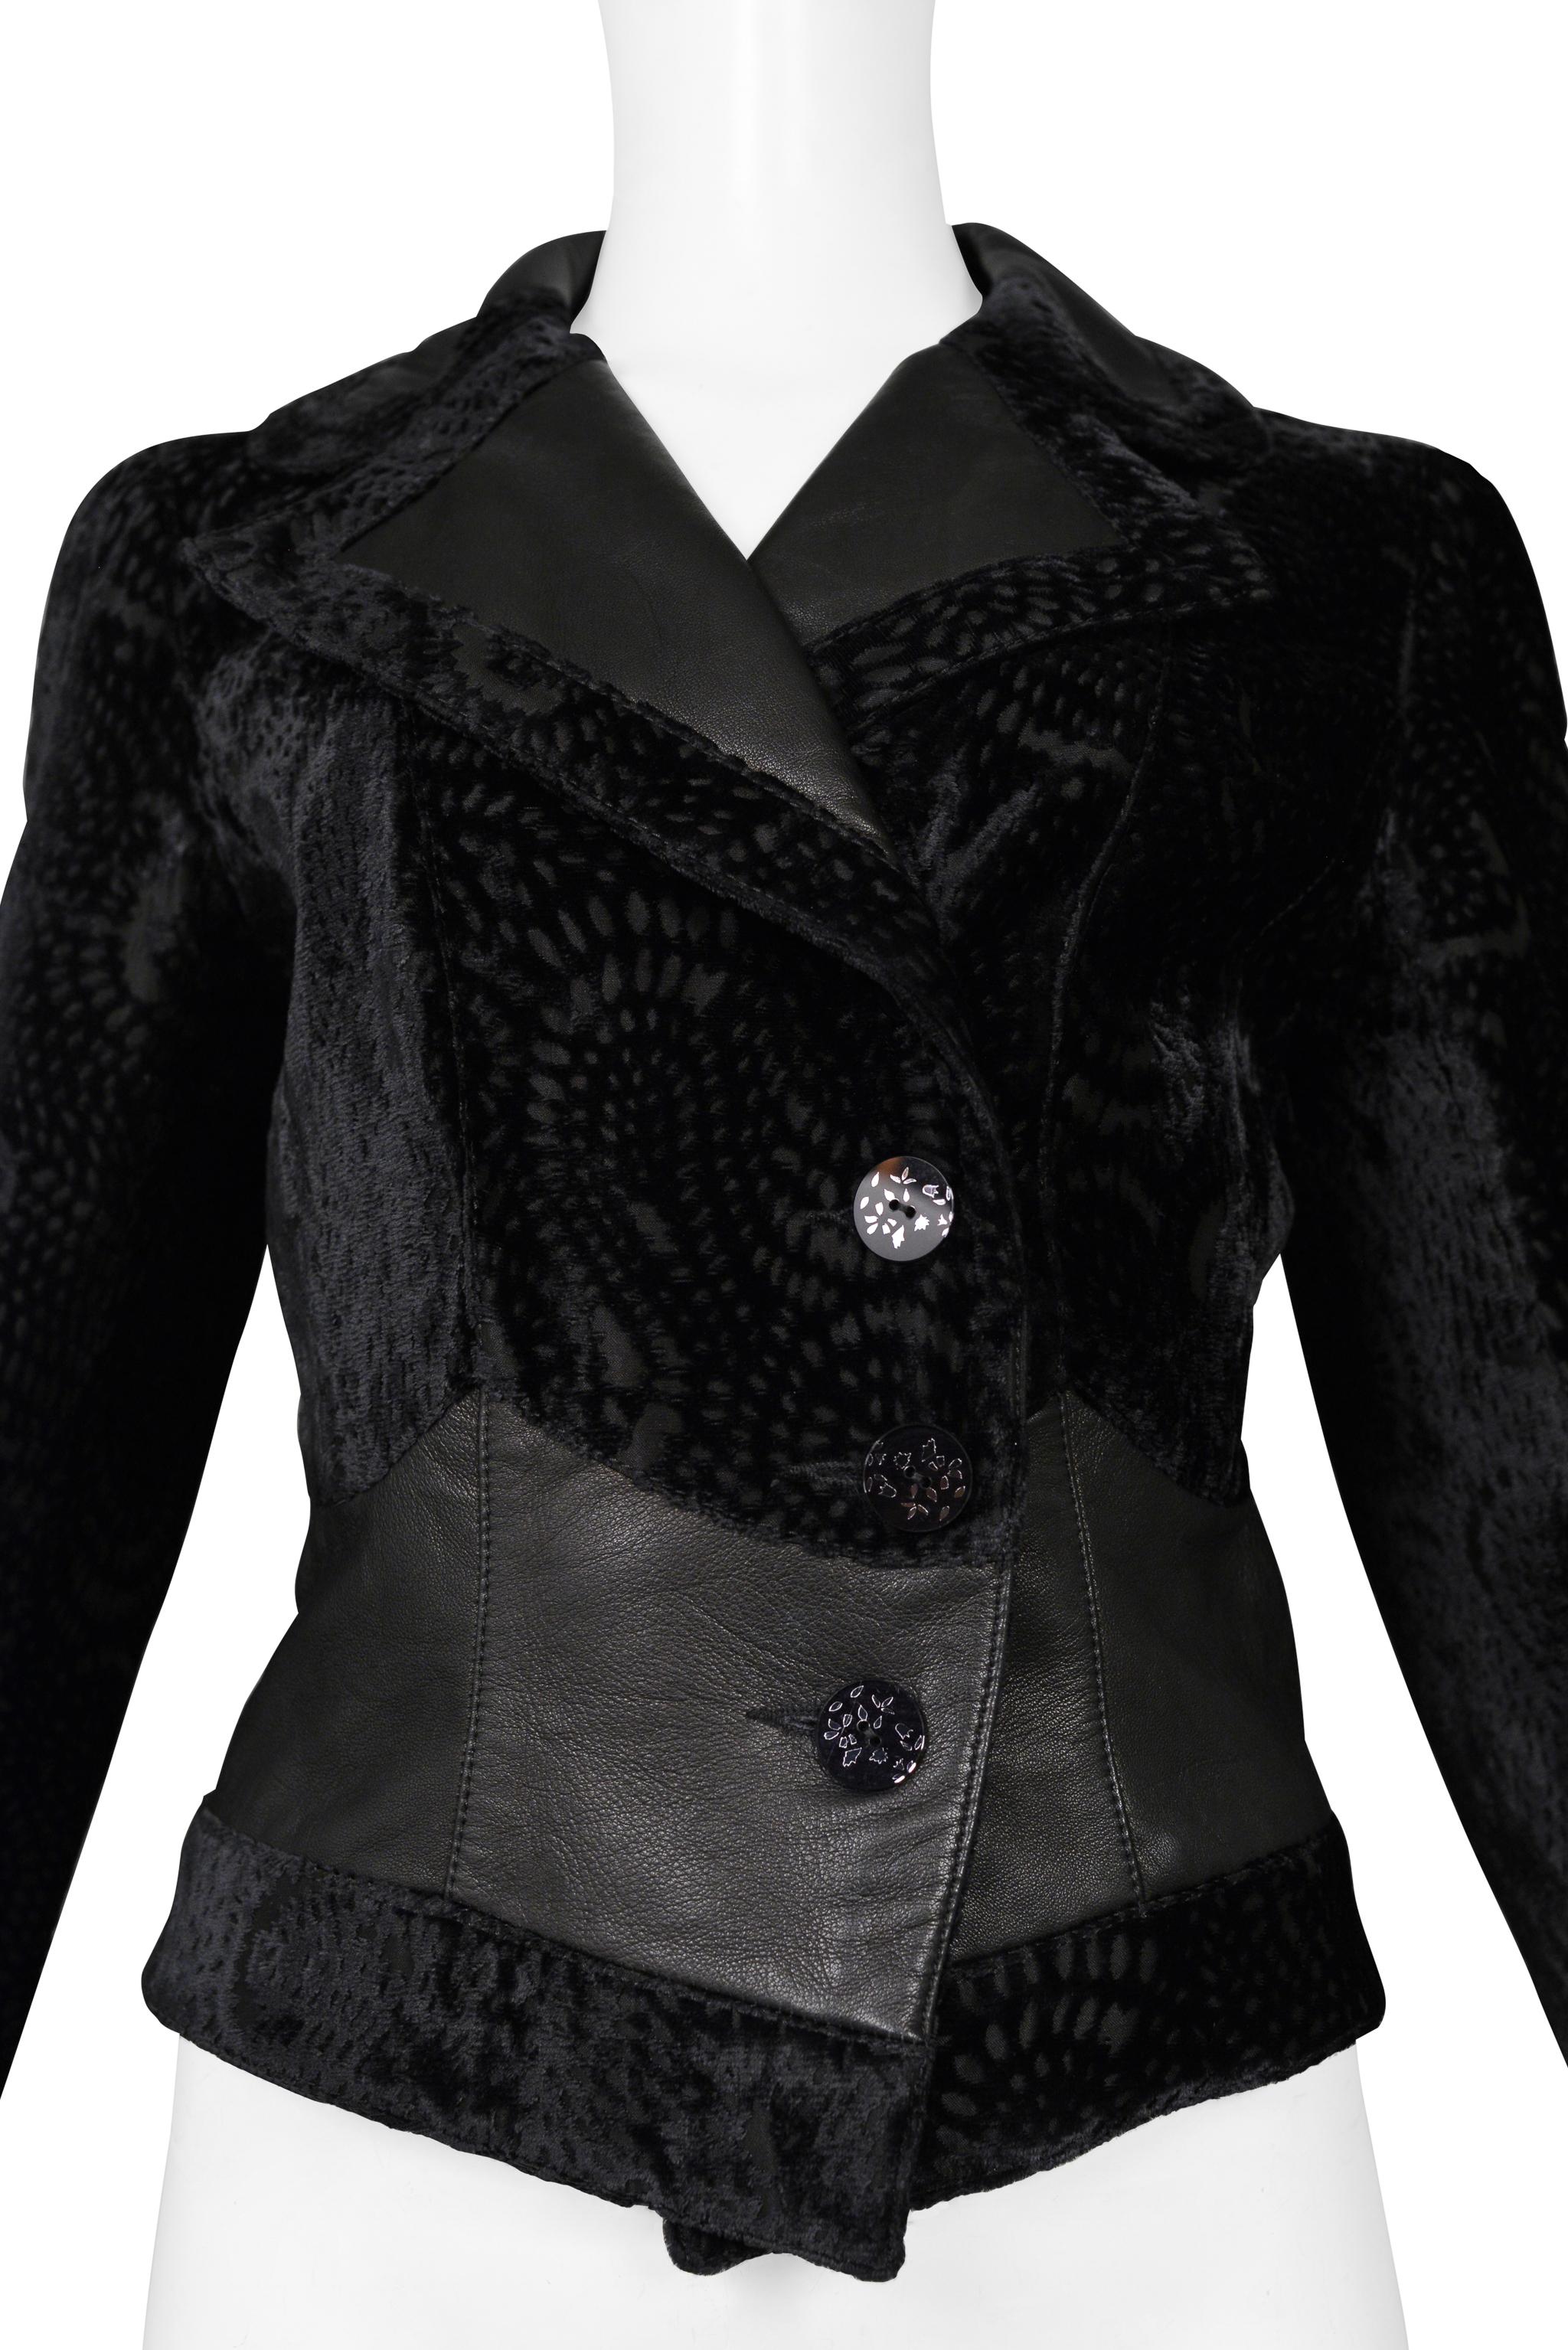 John Galliano Black Floral Silk Velvet Jacket With Leather Insets 2005 In Excellent Condition For Sale In Los Angeles, CA